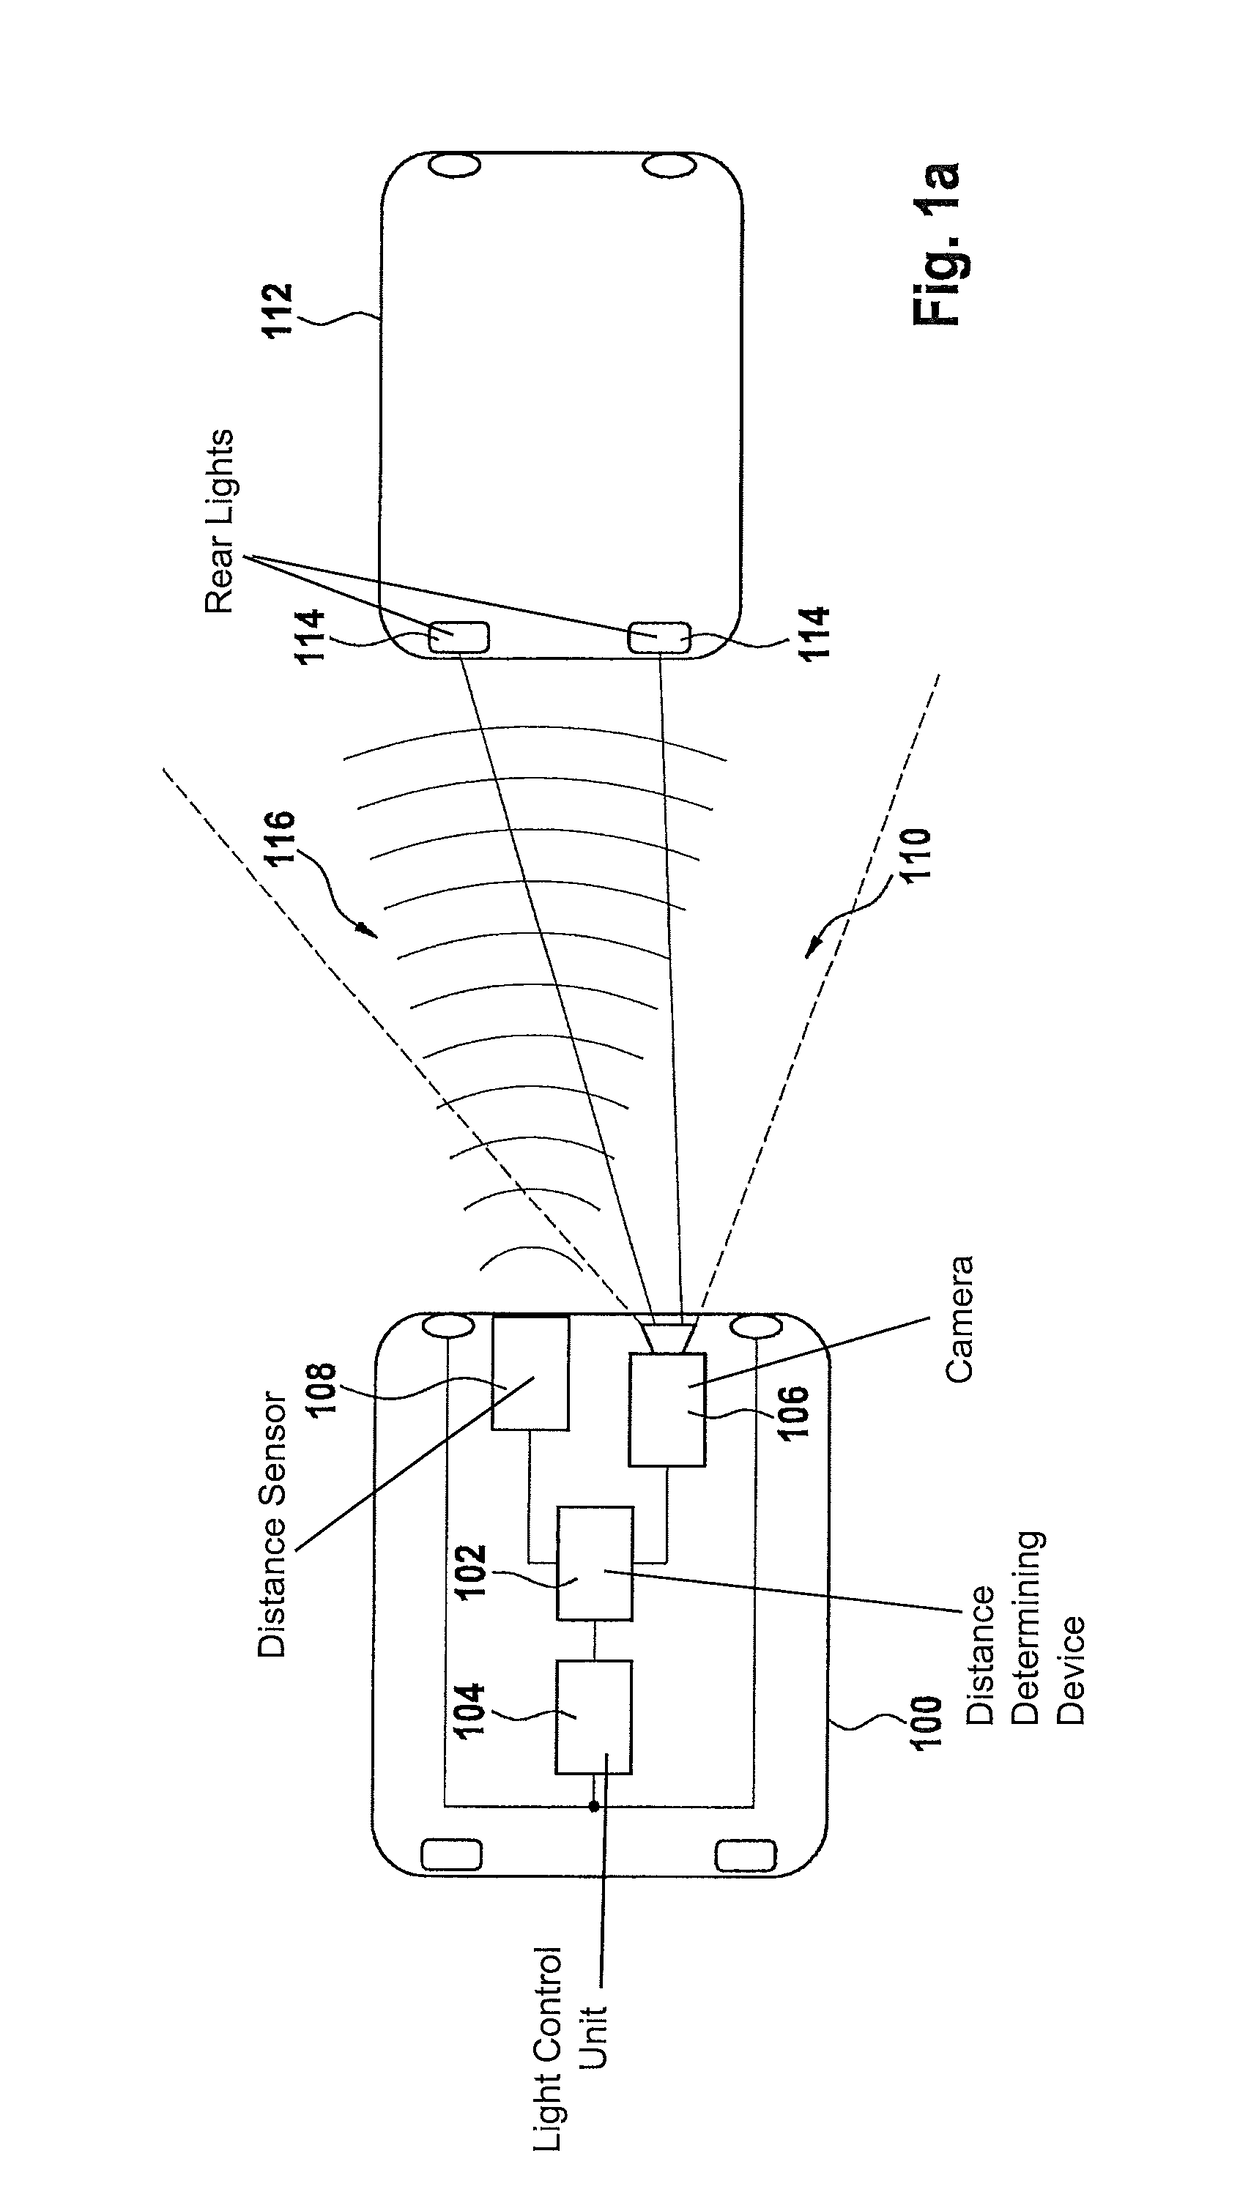 Method and device for providing a signal for a light control unit